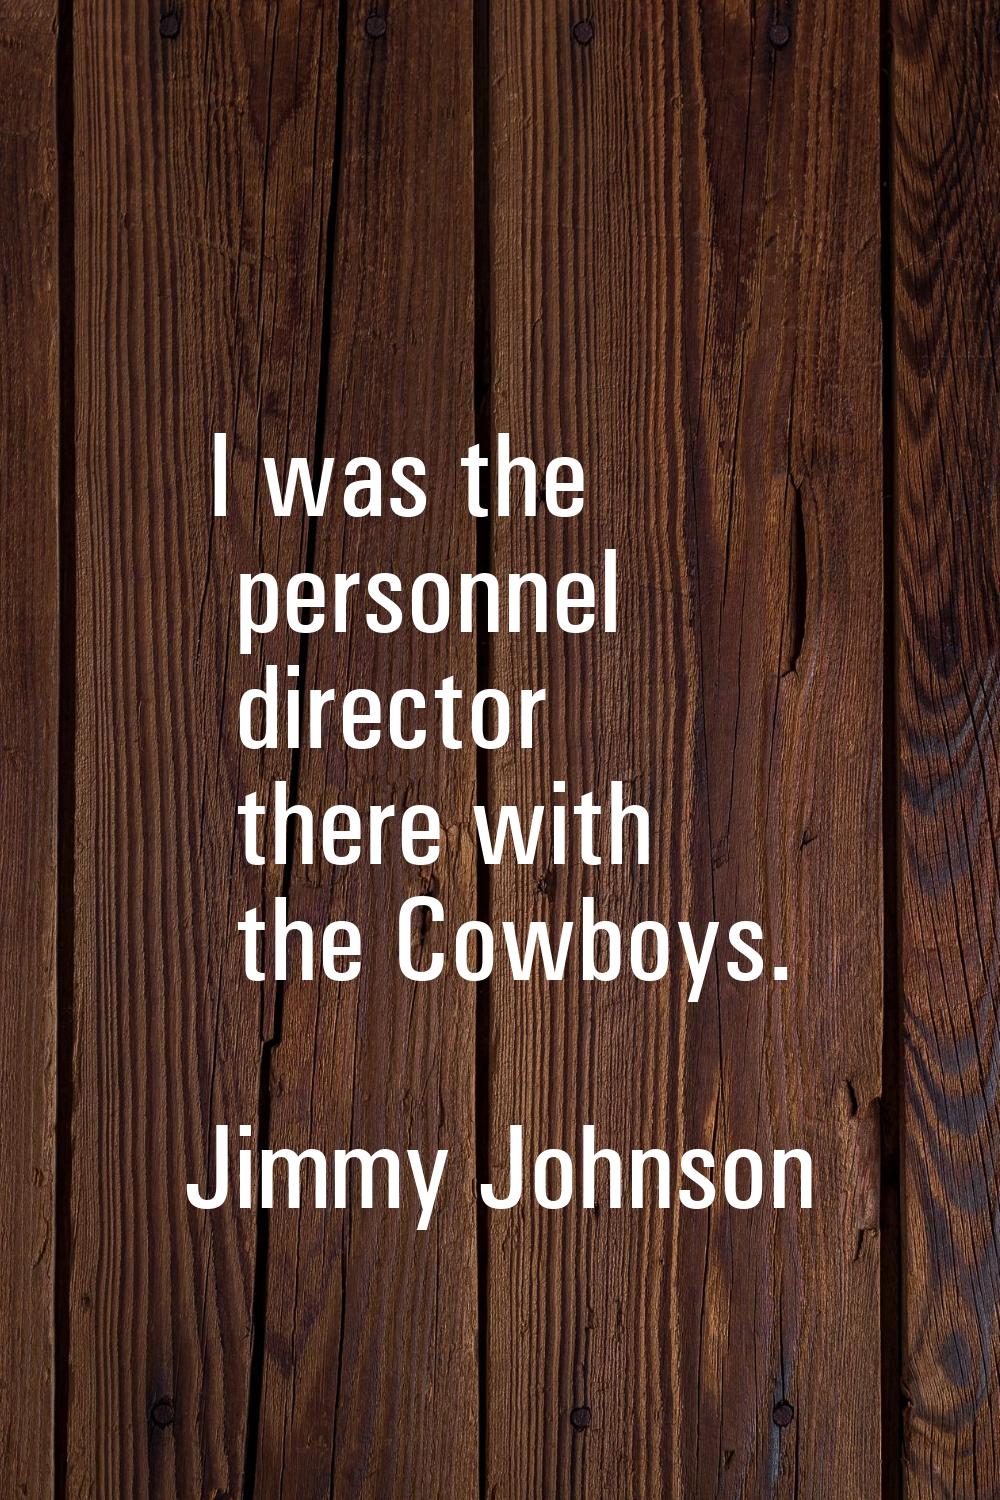 I was the personnel director there with the Cowboys.